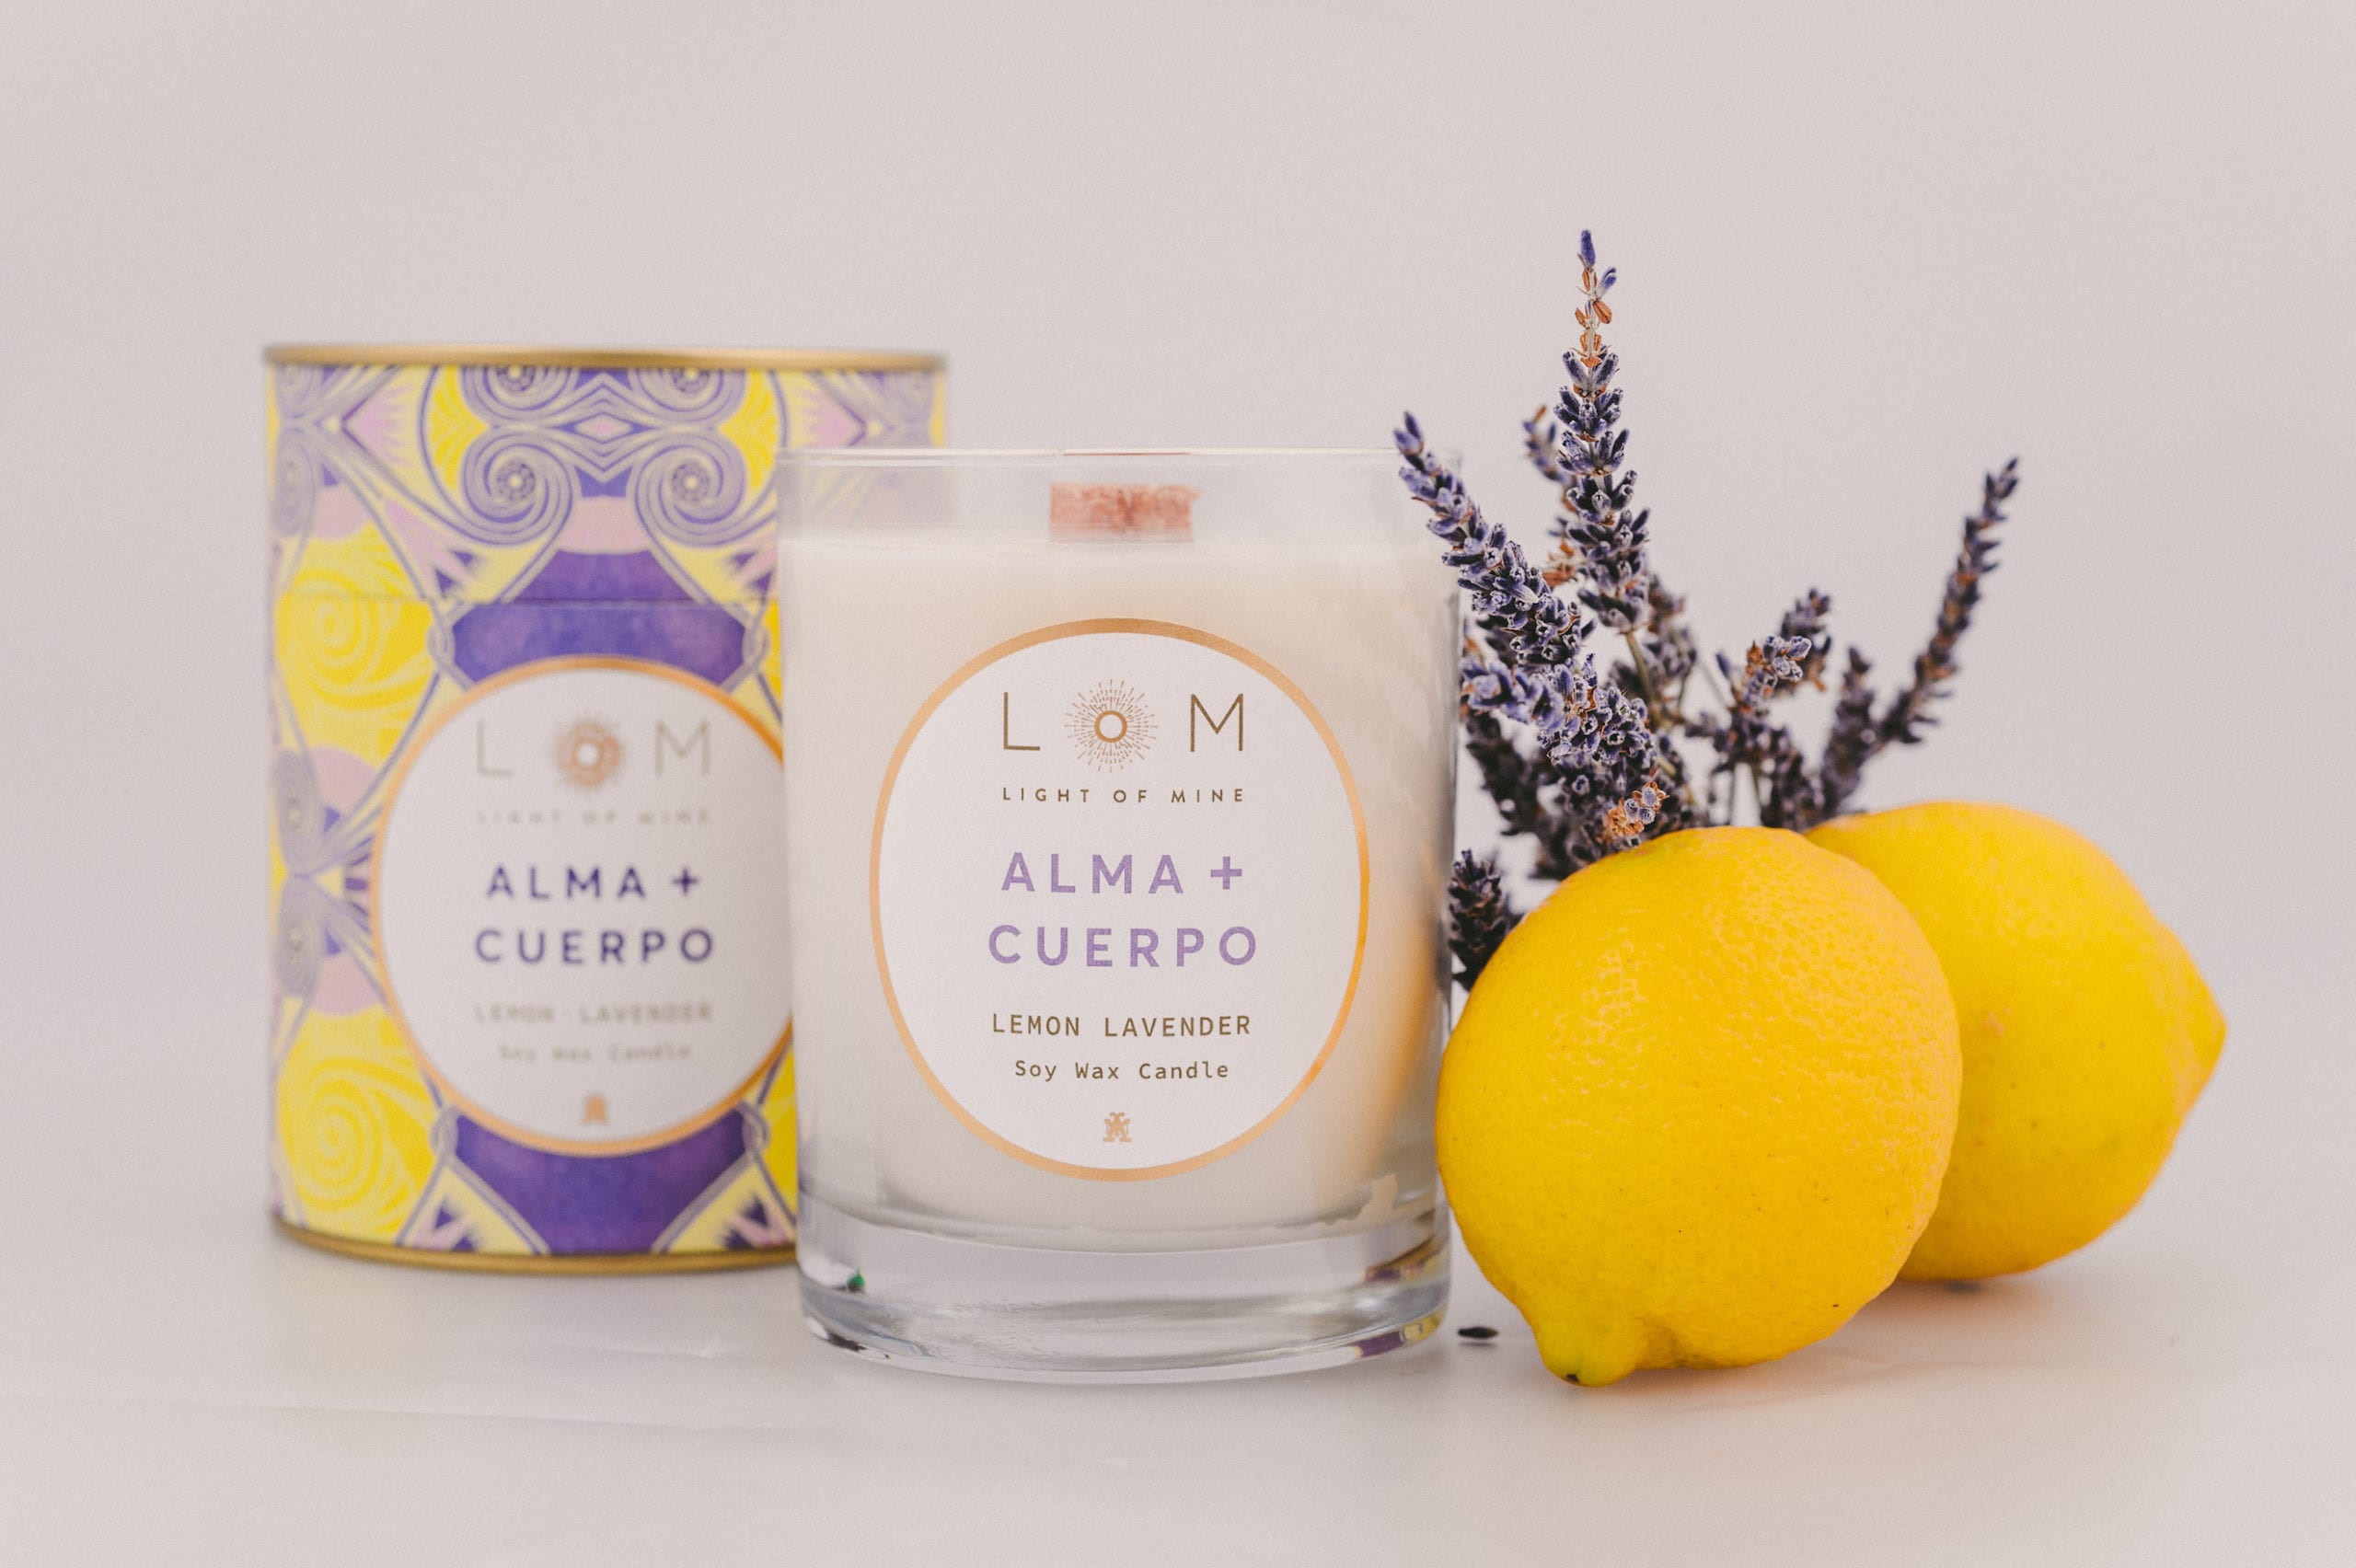 Two Light of Mine Alma and Cuerpo brand with Lemon Lavender soy wax scented candles next to sprig of lavender and two lemons